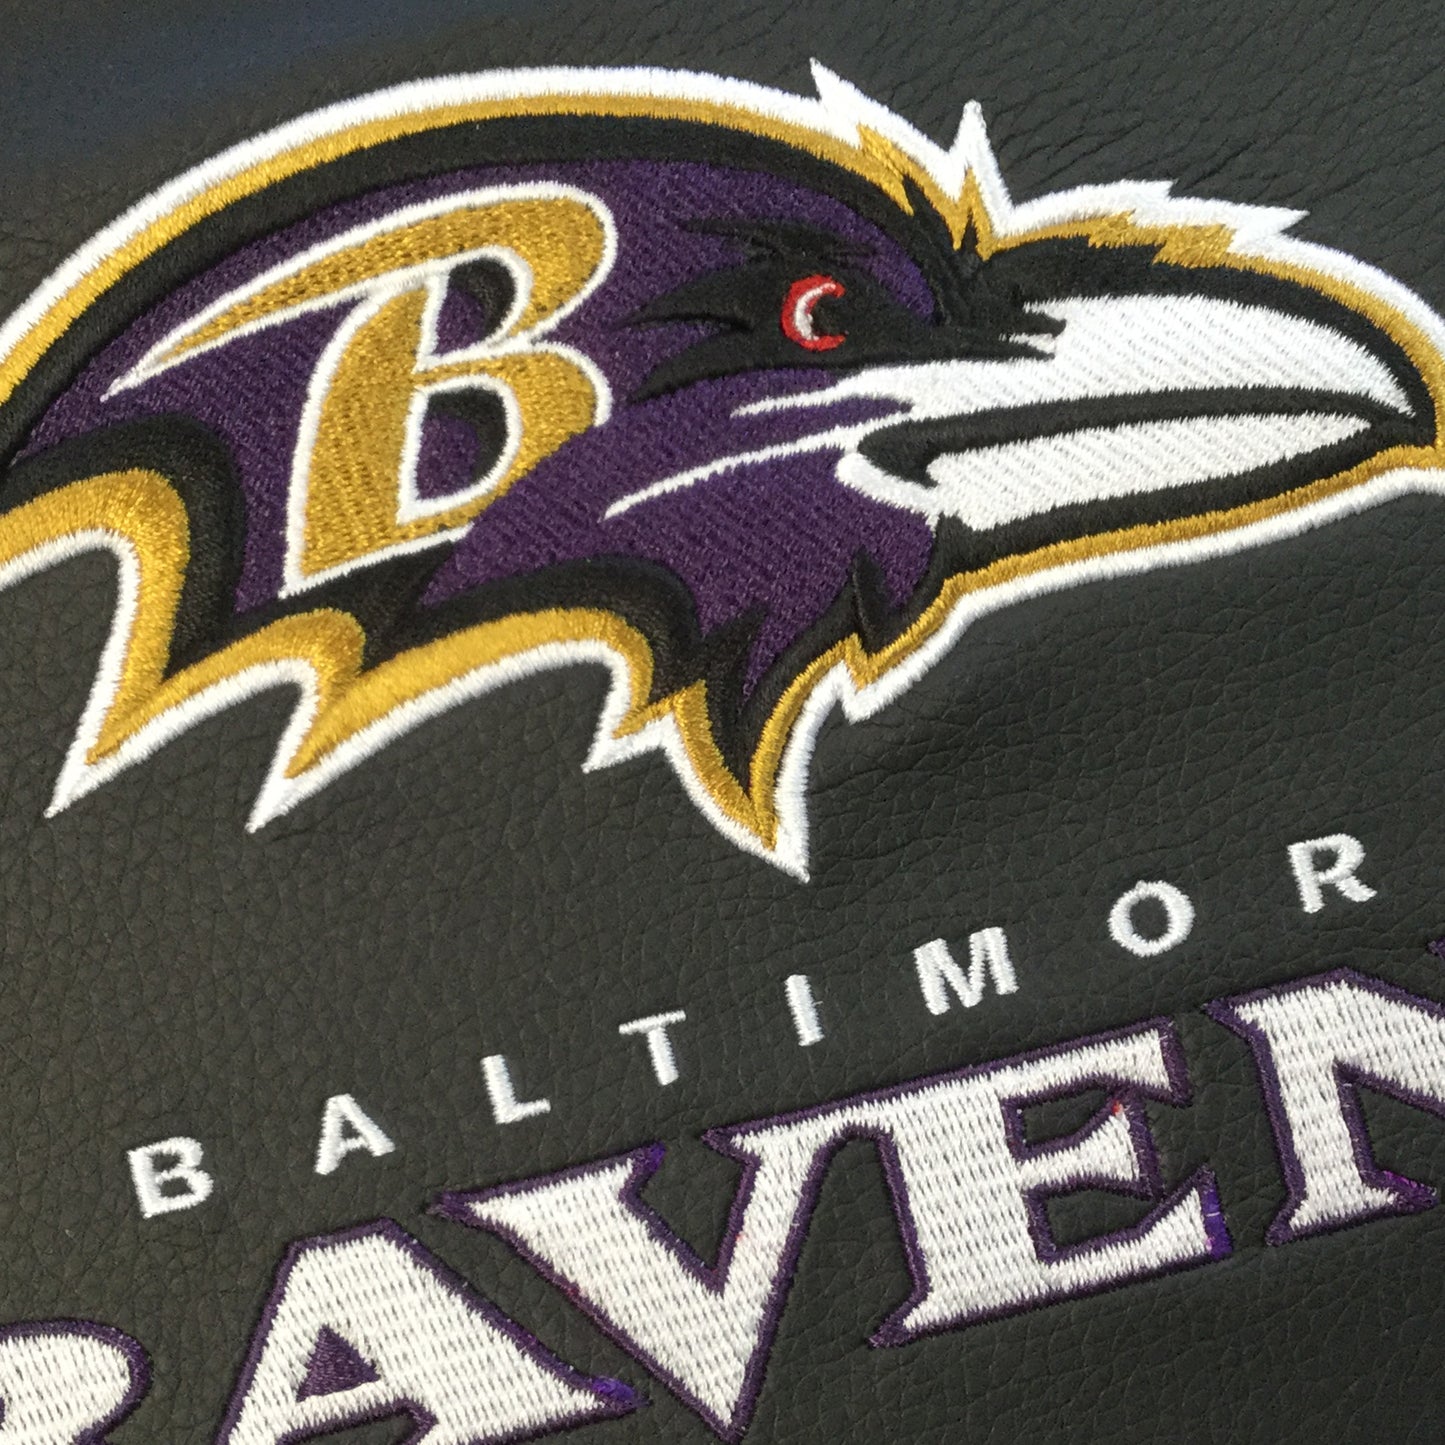 Xpression Pro Gaming Chair with Baltimore Ravens Secondary Logo